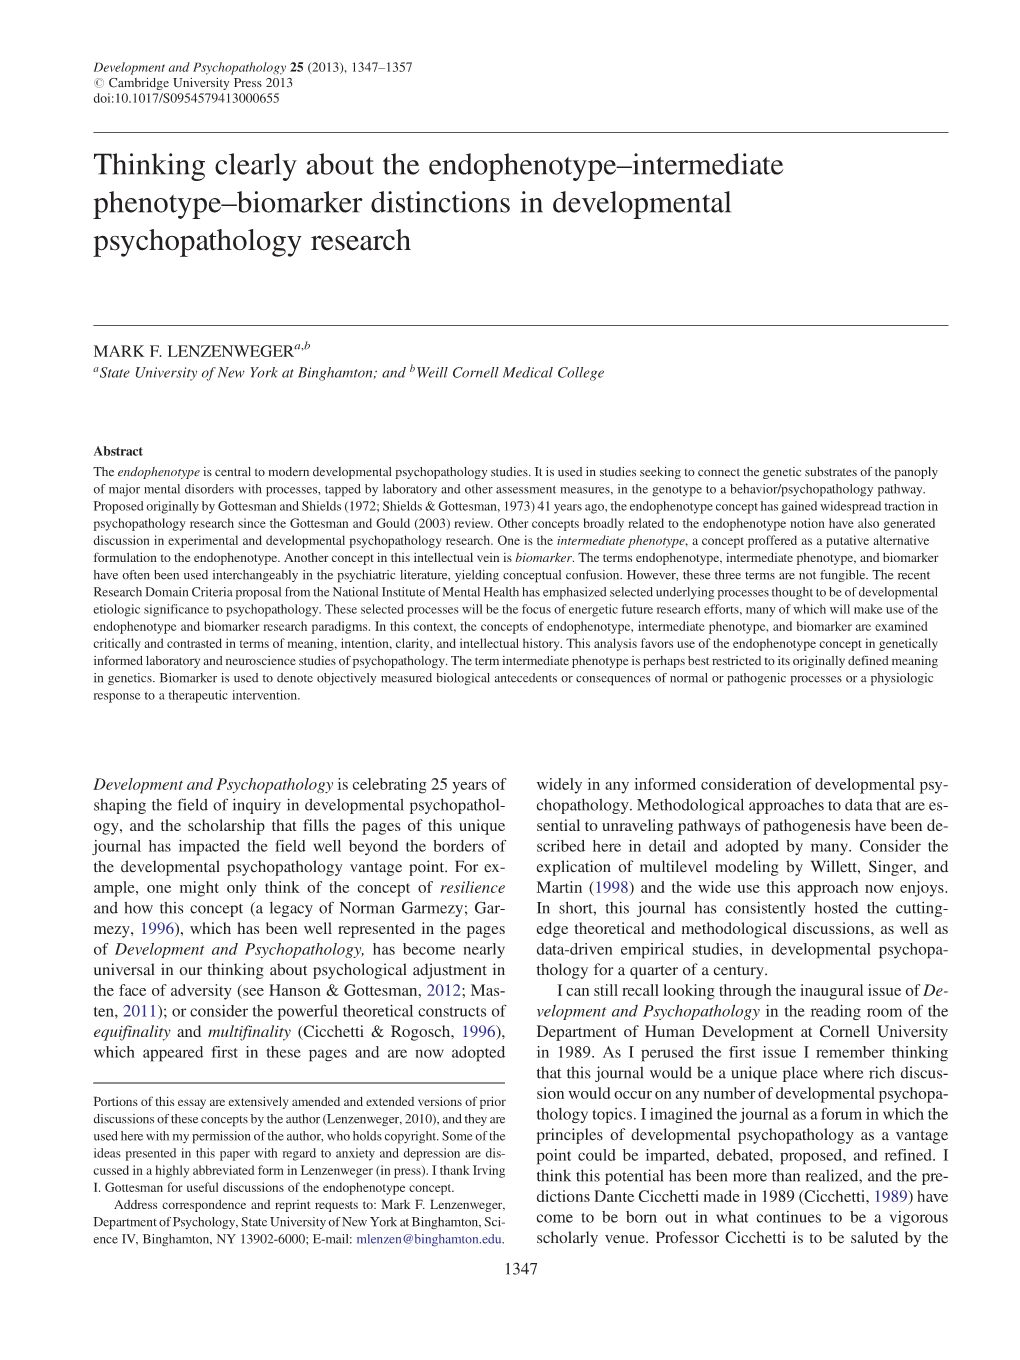 Thinking Clearly About the Endophenotype–Intermediate Phenotype–Biomarker Distinctions in Developmental Psychopathology Research